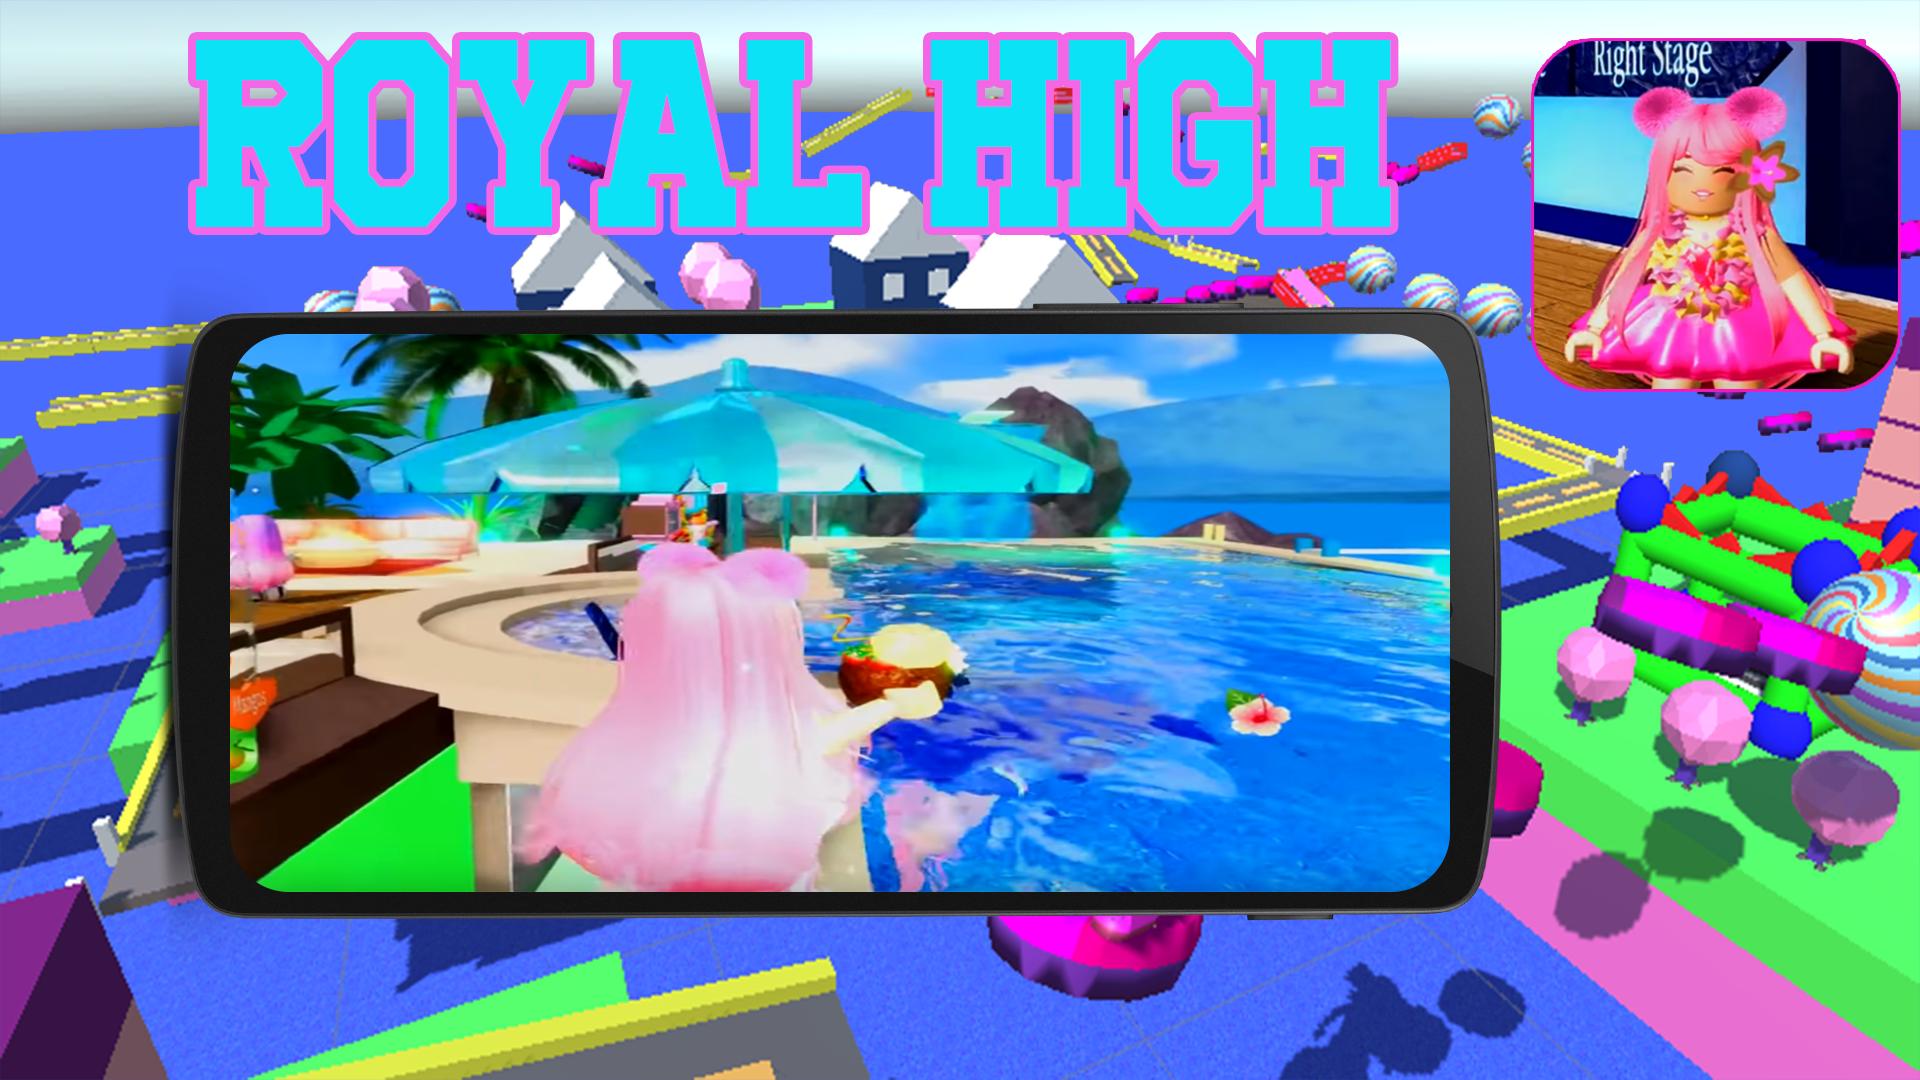 Download Royale High School Roblox's android on PC